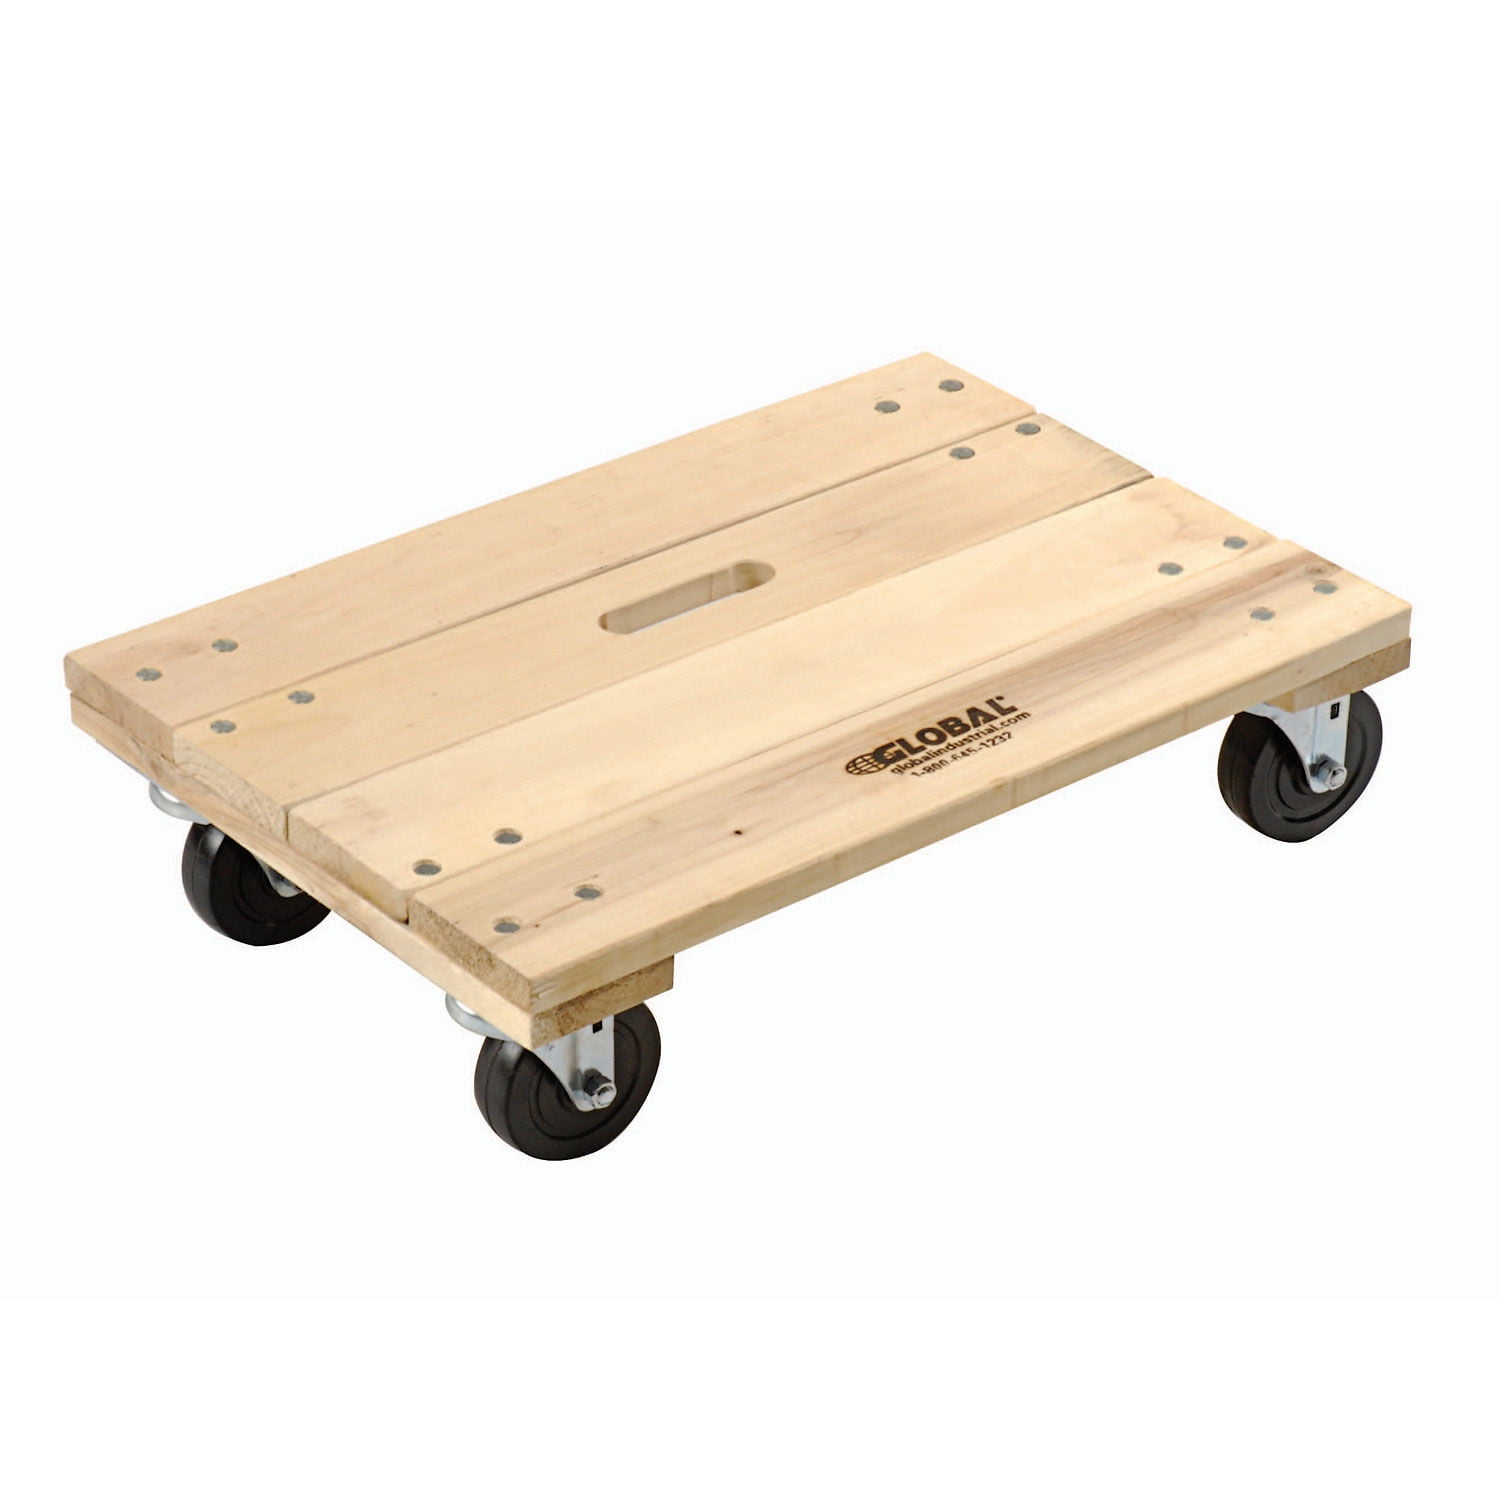 Pack of 2 1200 lbs Capacity 36 Length x 24 Width x 6-3/4 Height Vestil HDOS-2436-12 Solid Deck Hardwood Dolly with Hard Rubber Casters 